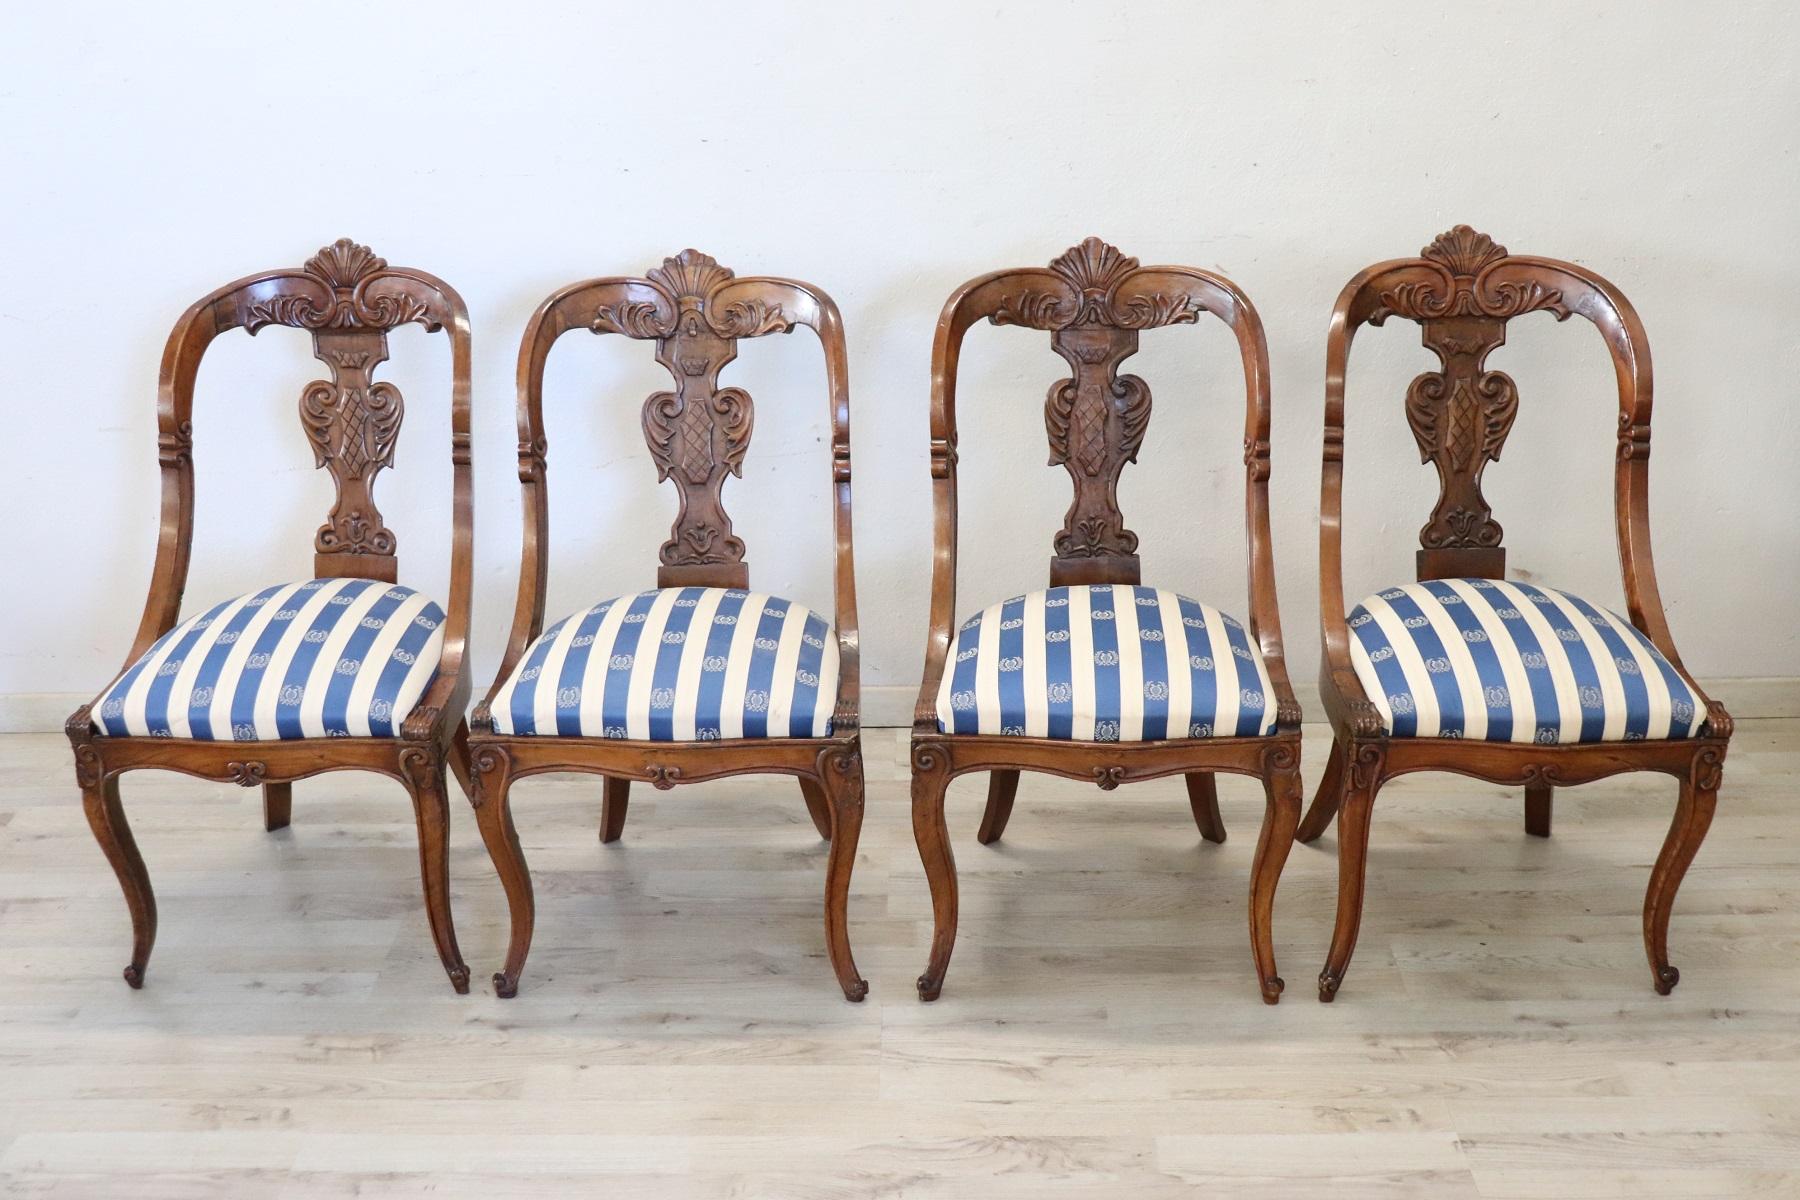 Beautiful 19th century of the period Charles X Italian set of four chairs antique in solid walnut wood. Characterized by an enveloping and refined backrest, embellished with an elaborate decoration hand-carved in walnut wood. The seat is wide and